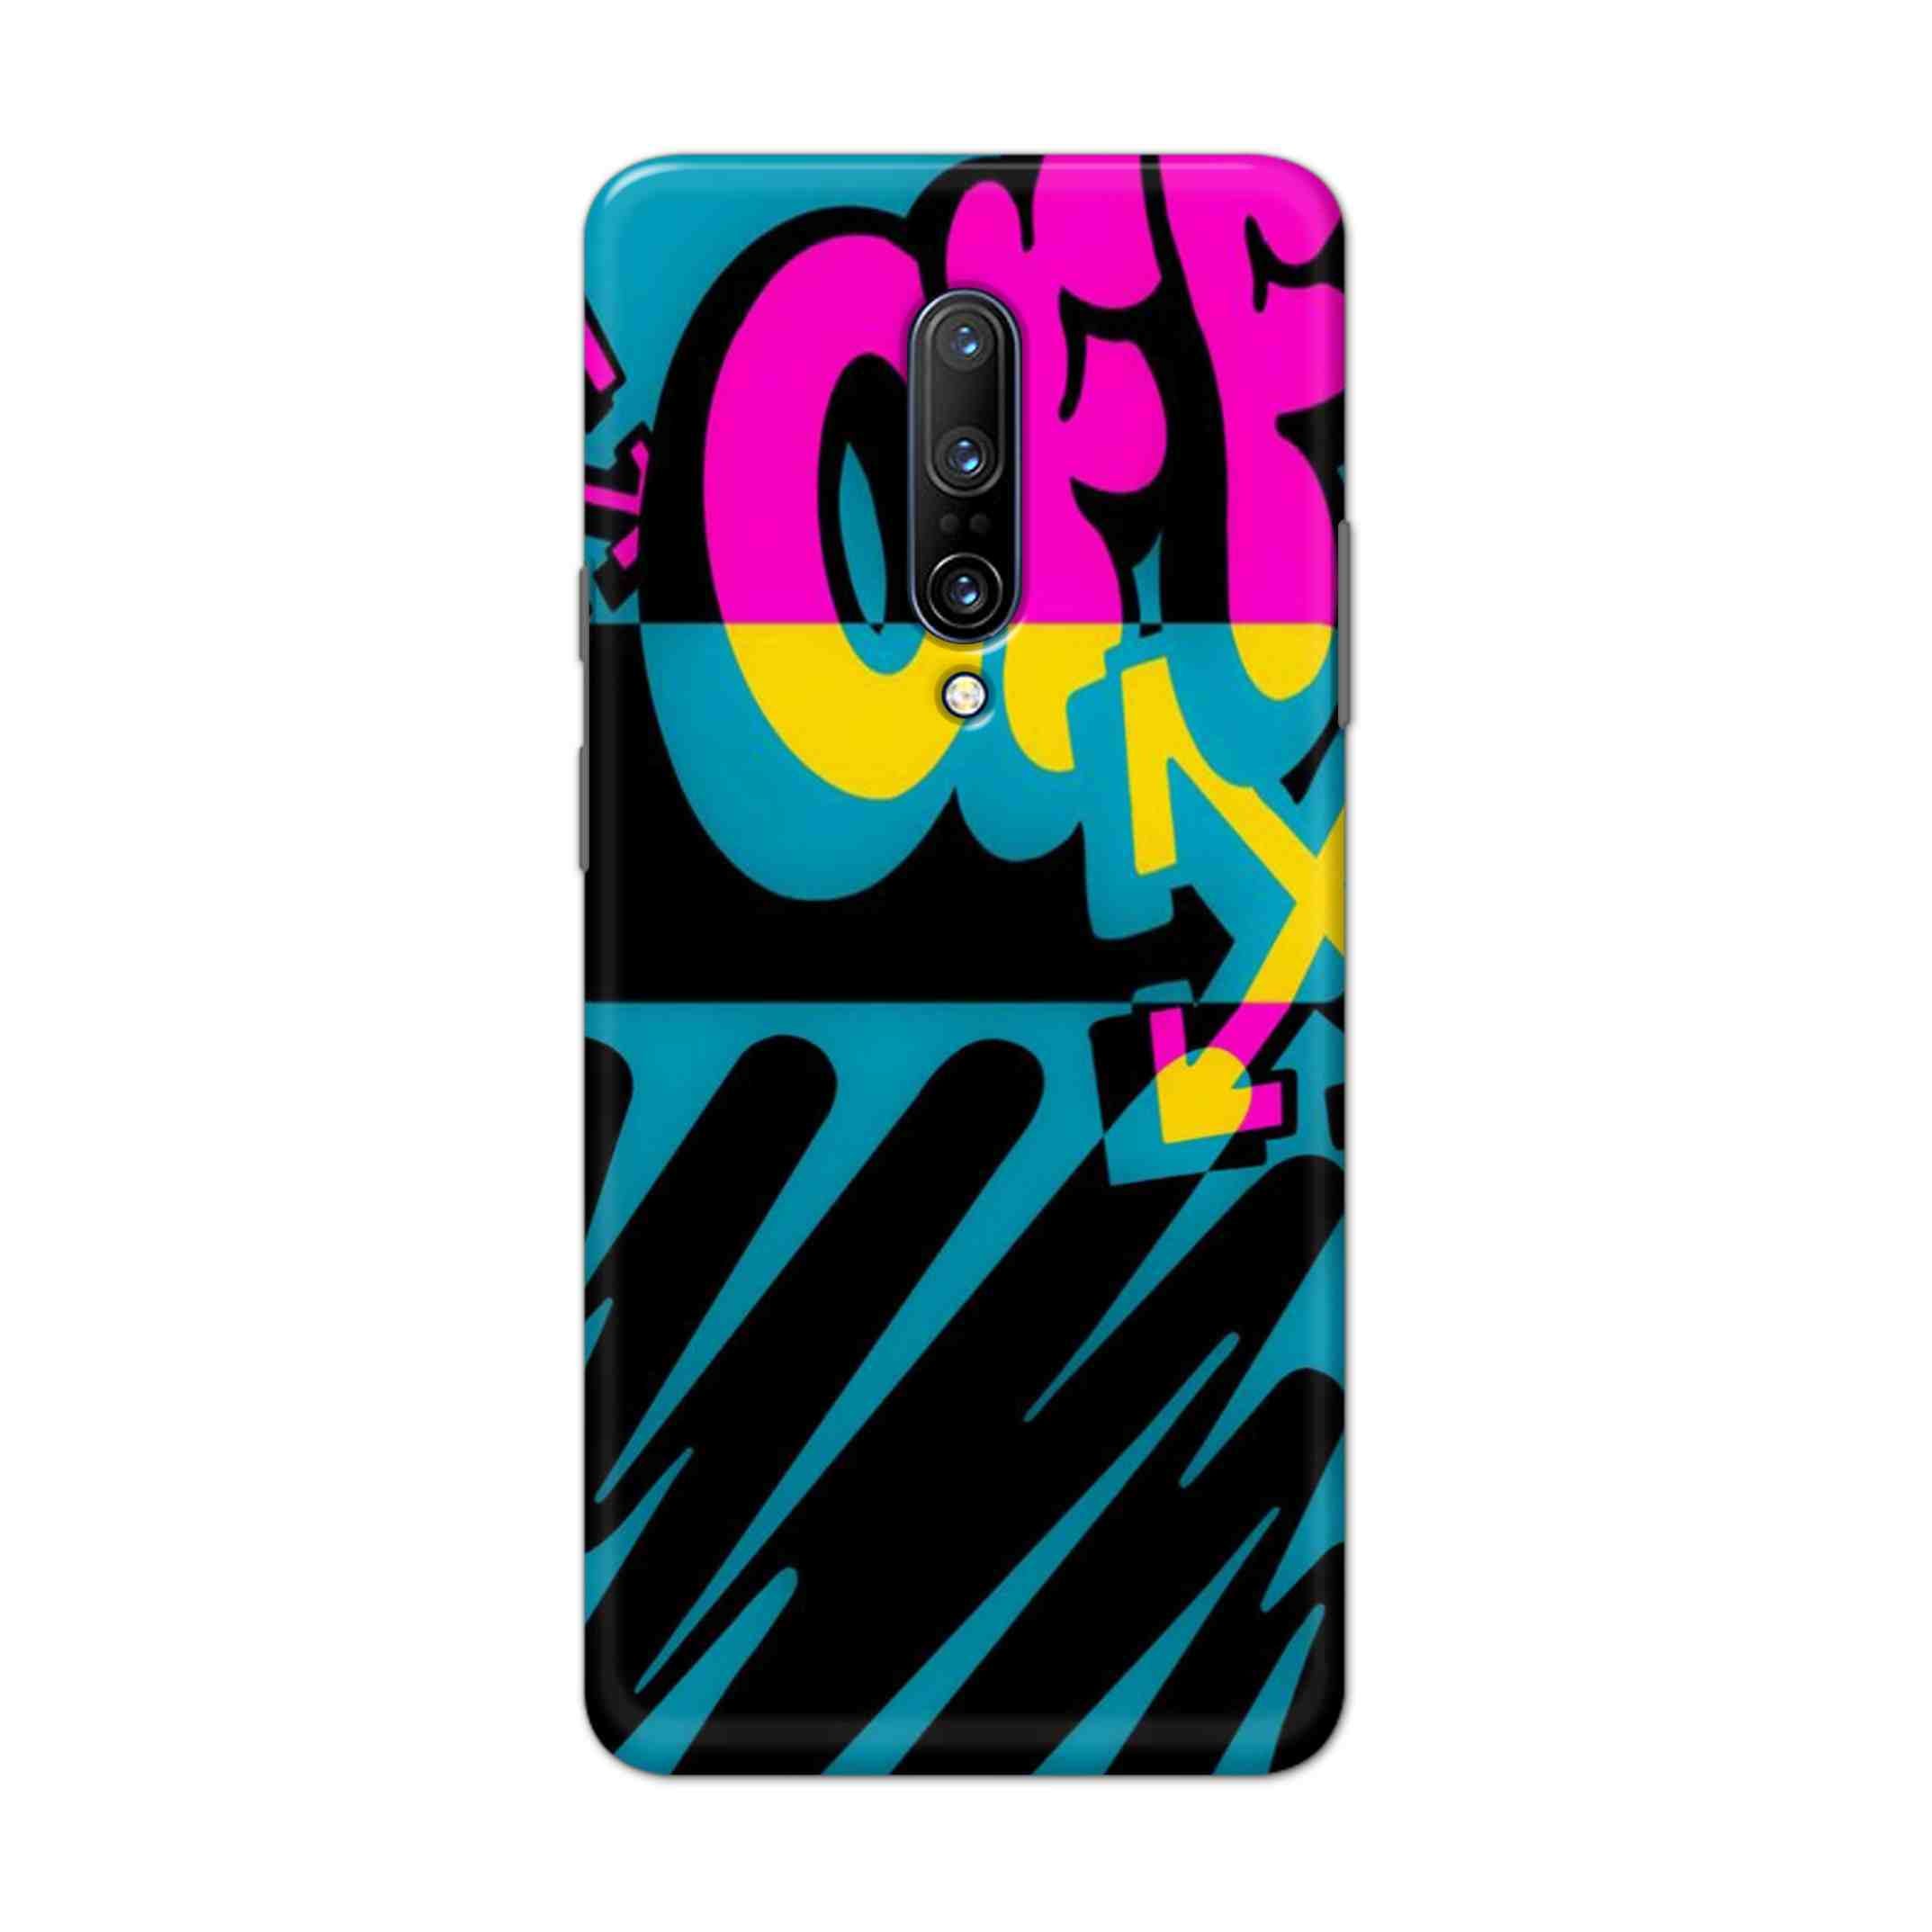 Buy Off Hard Back Mobile Phone Case Cover For OnePlus 7 Pro Online